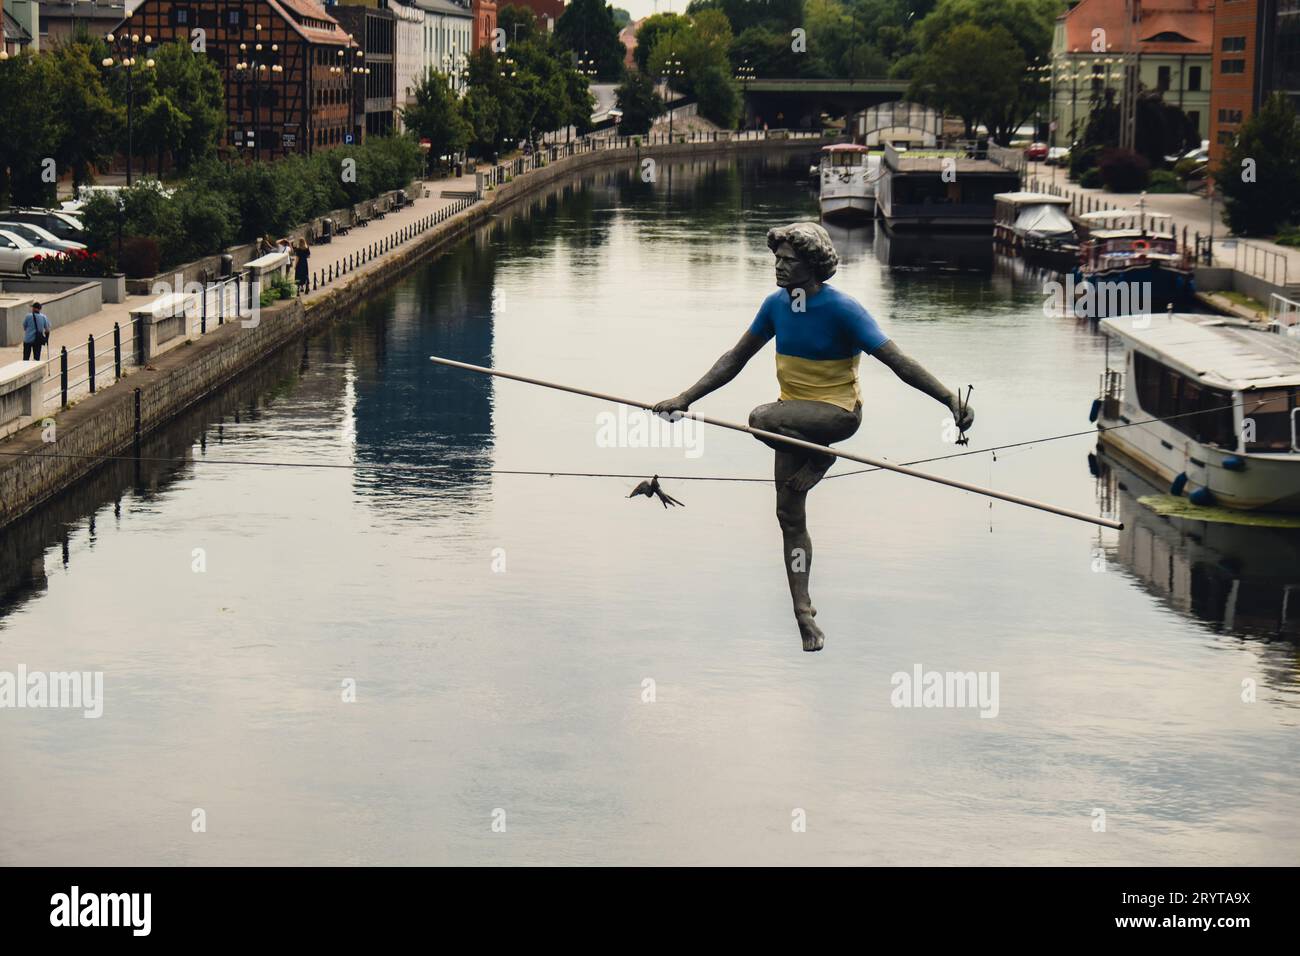 Bydgoszcz, Poland - August 2022 Brda river in Bydgoszcz Man crossing a river sculpture , of a man balancing on a wire, old grana Stock Photo